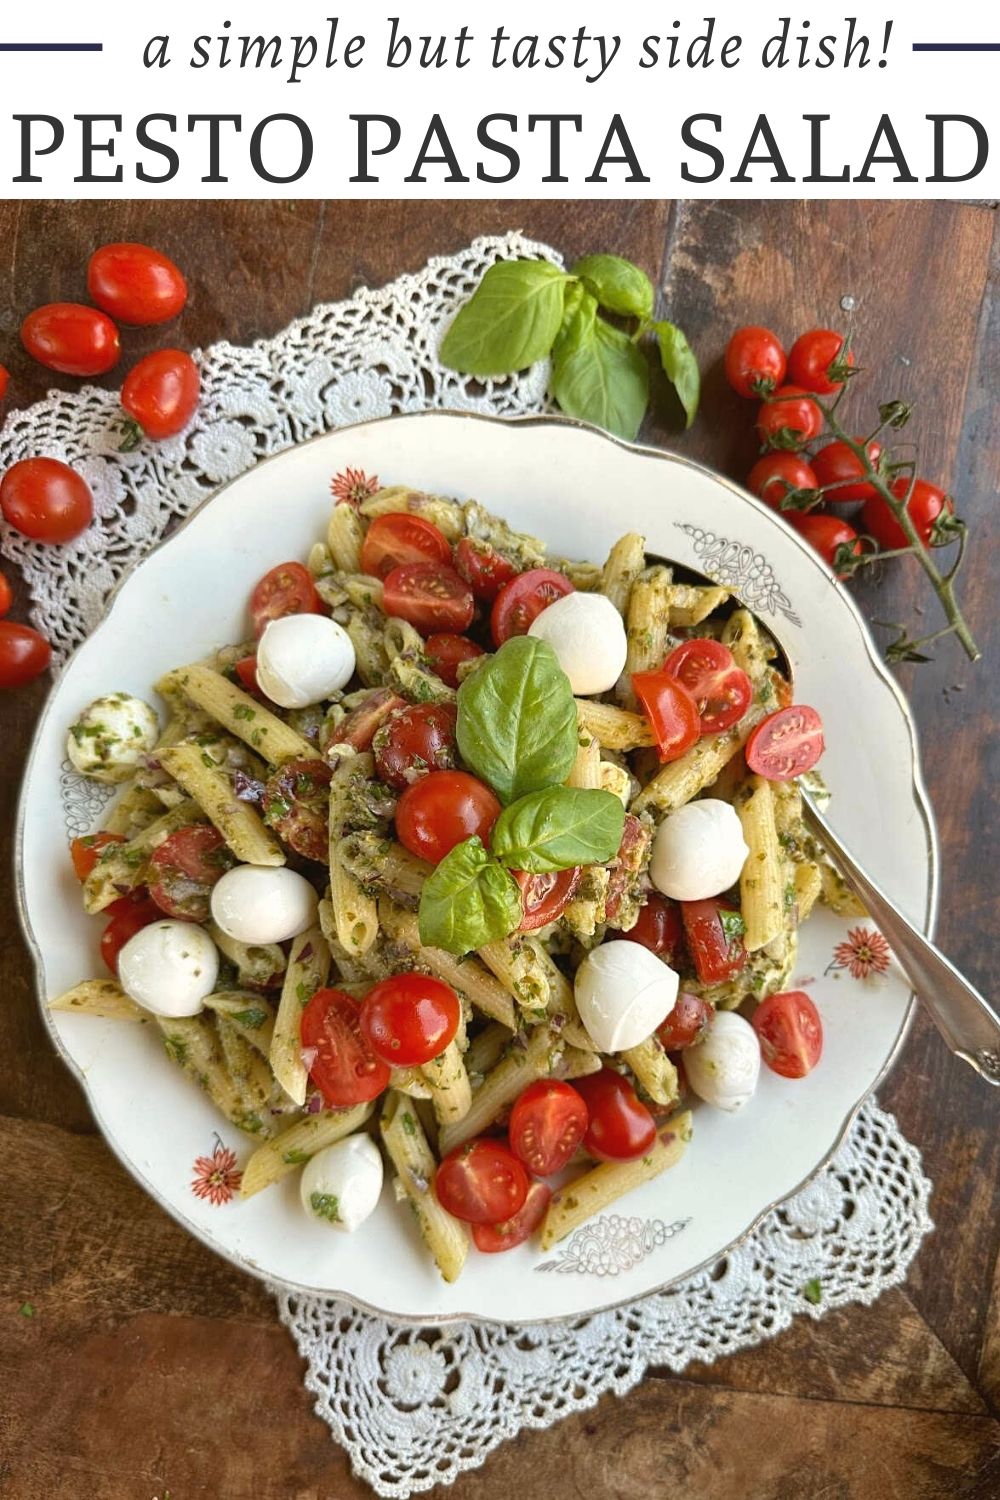 When the temperatures rise and outdoor party season begins, there's nothing better than a refreshing pesto pasta salad. With sun-ripened tomatoes and small creamy mozzarella pearls, this pasta salad is the perfect summer dish.